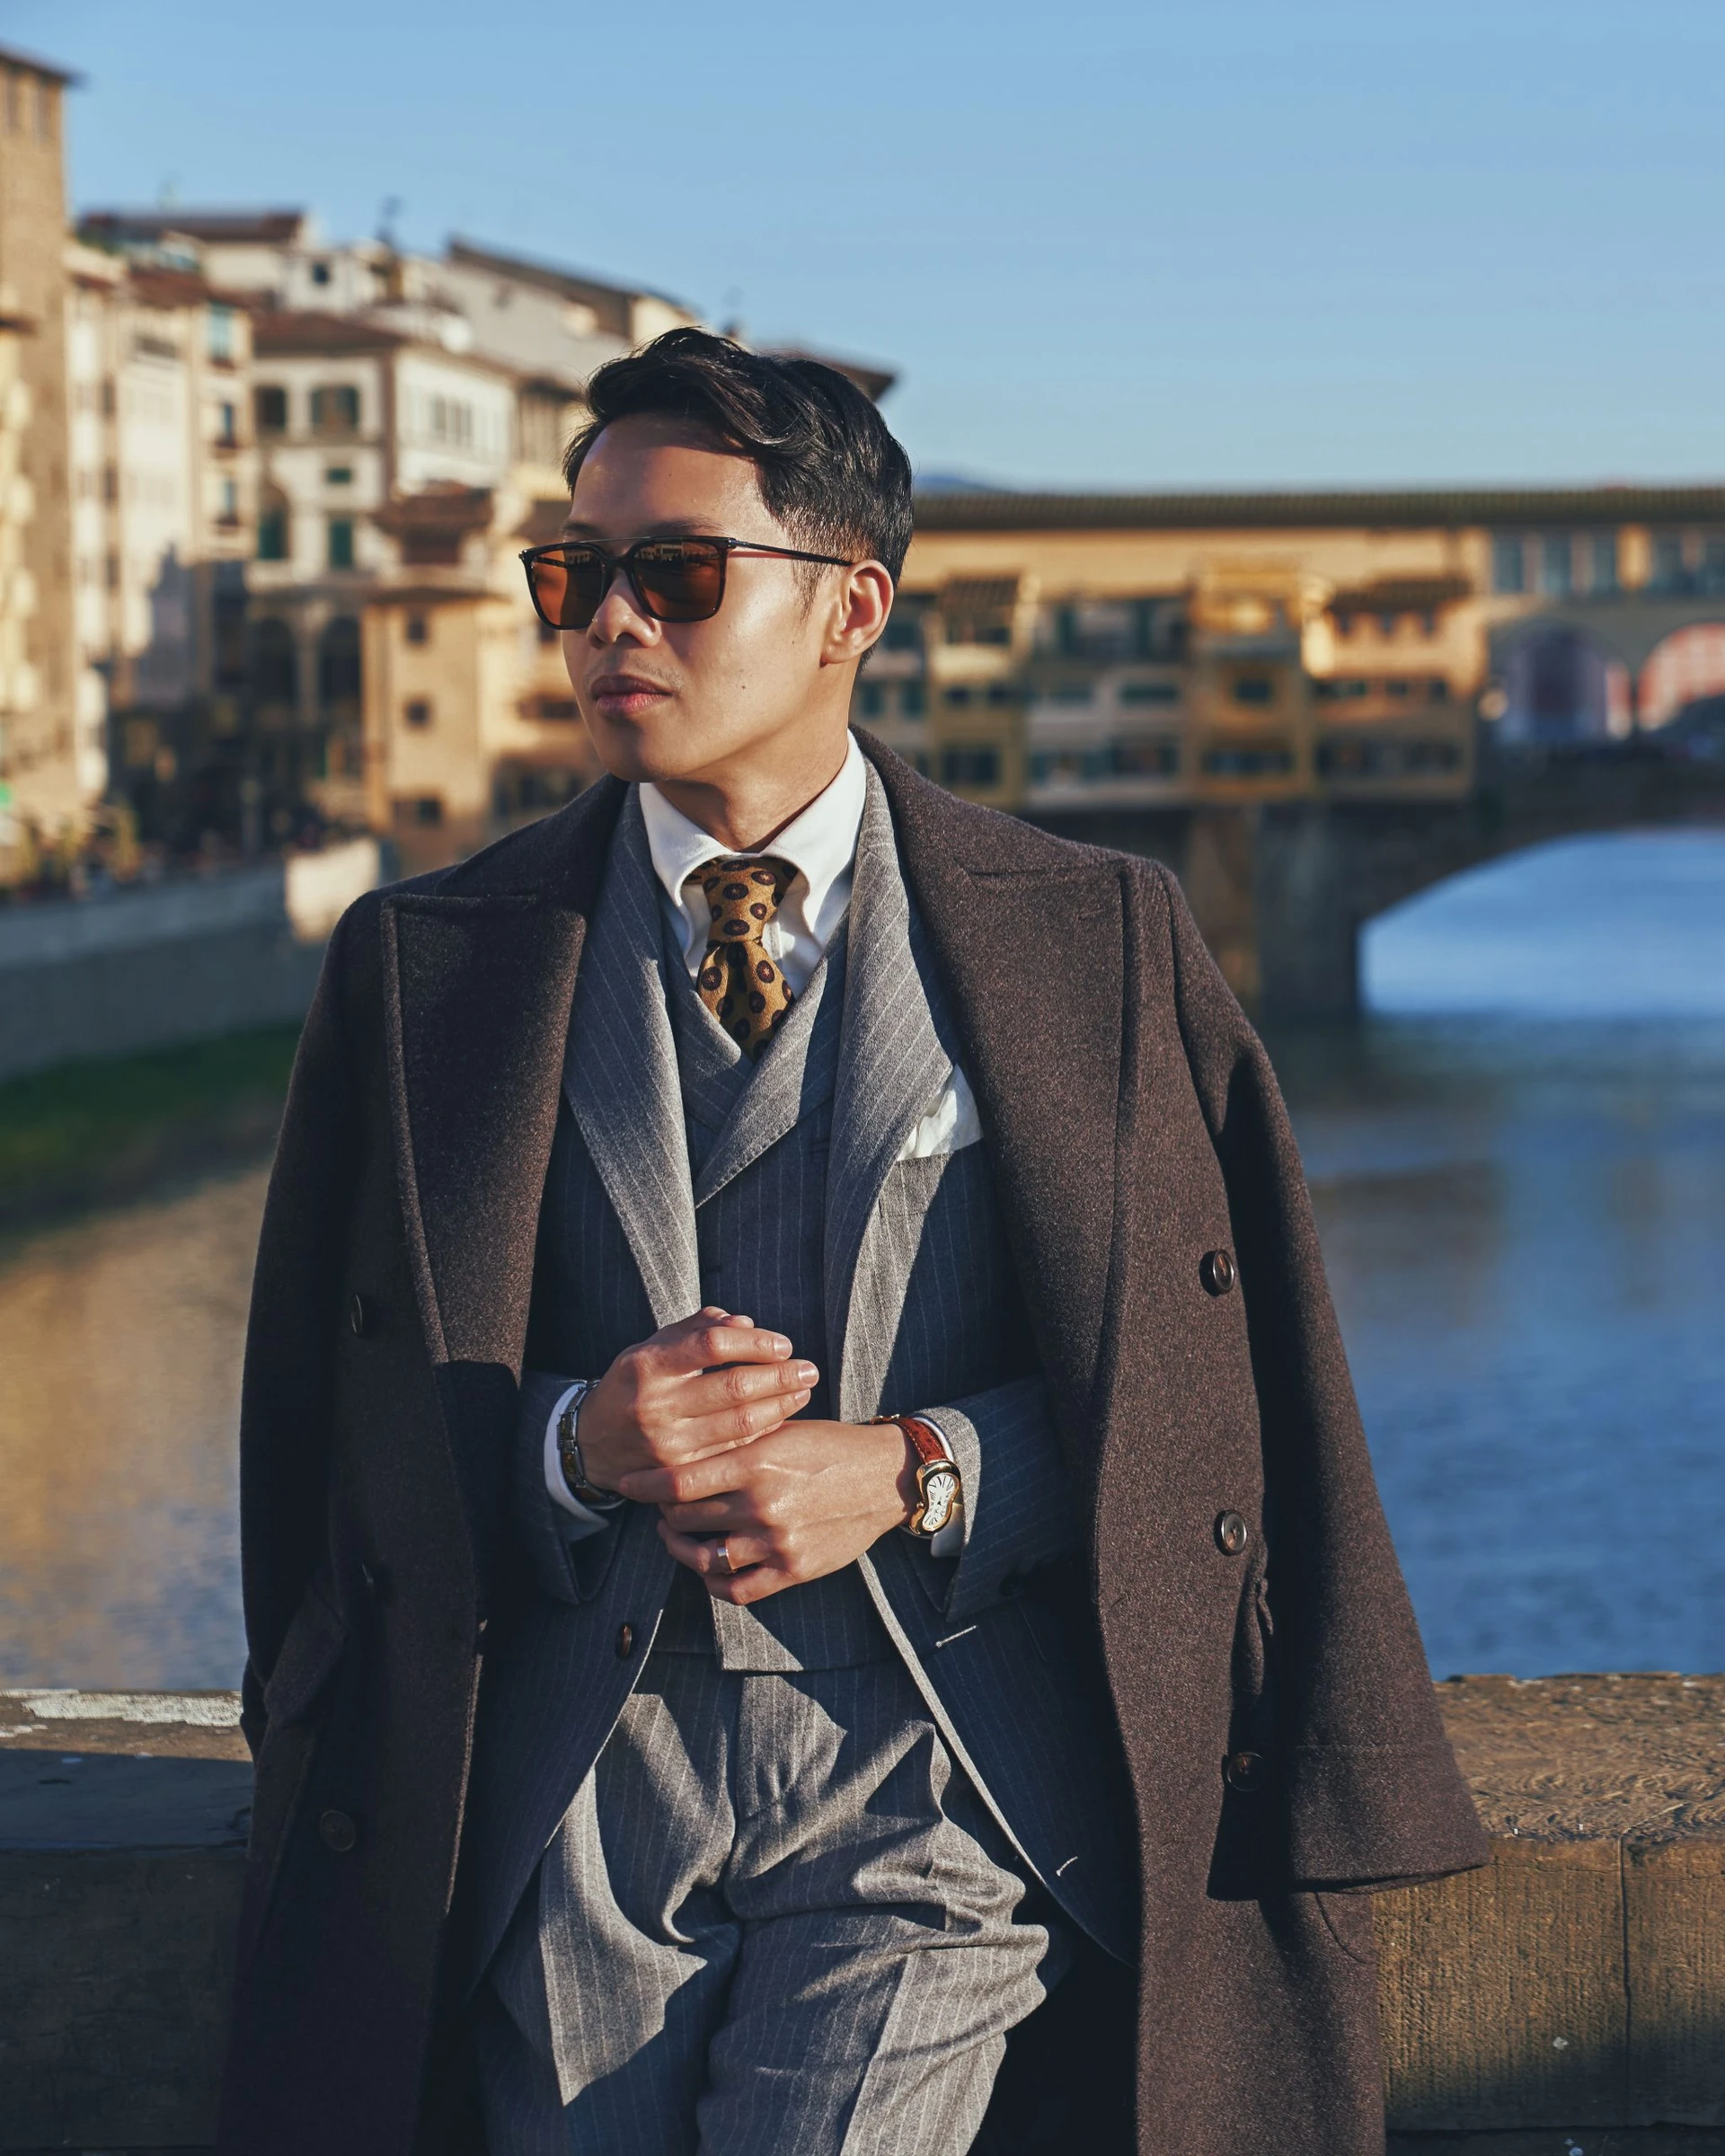 dresden ramos at pitti uomo 105, wearing a three piece pinstripe flannel suit made by mond of copenhagen